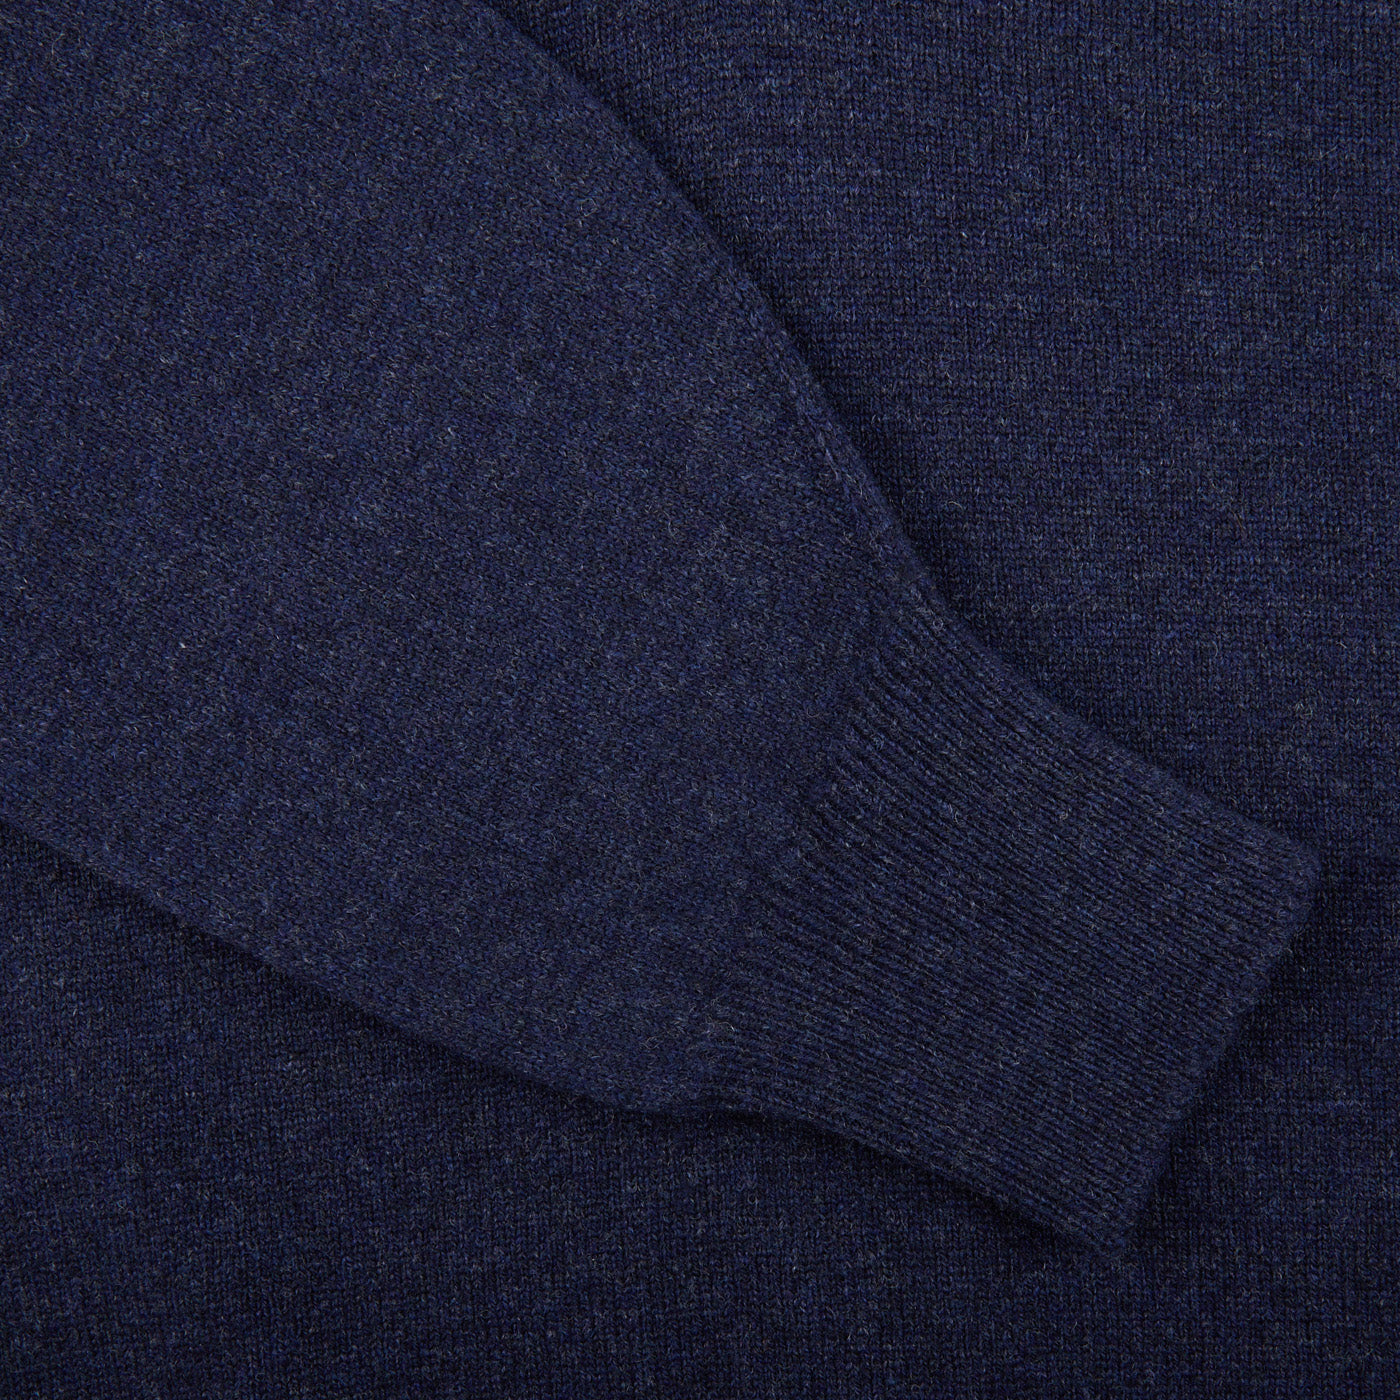 A close up of a William Lockie Oxford Blue Deep V-Neck Lambswool Sweater.